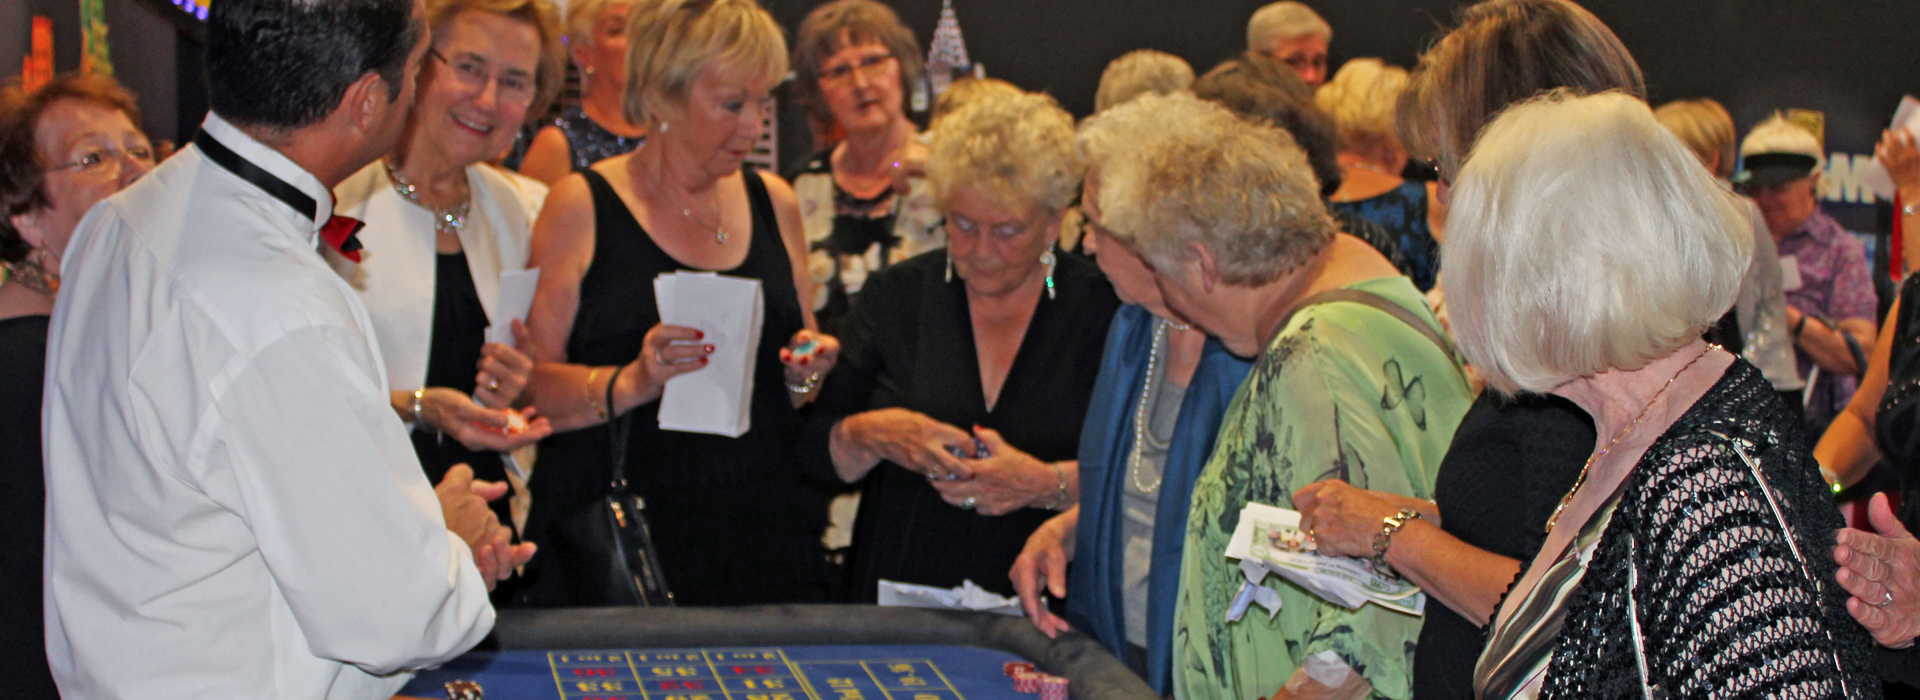 Casino Hire for Clubs & Associations